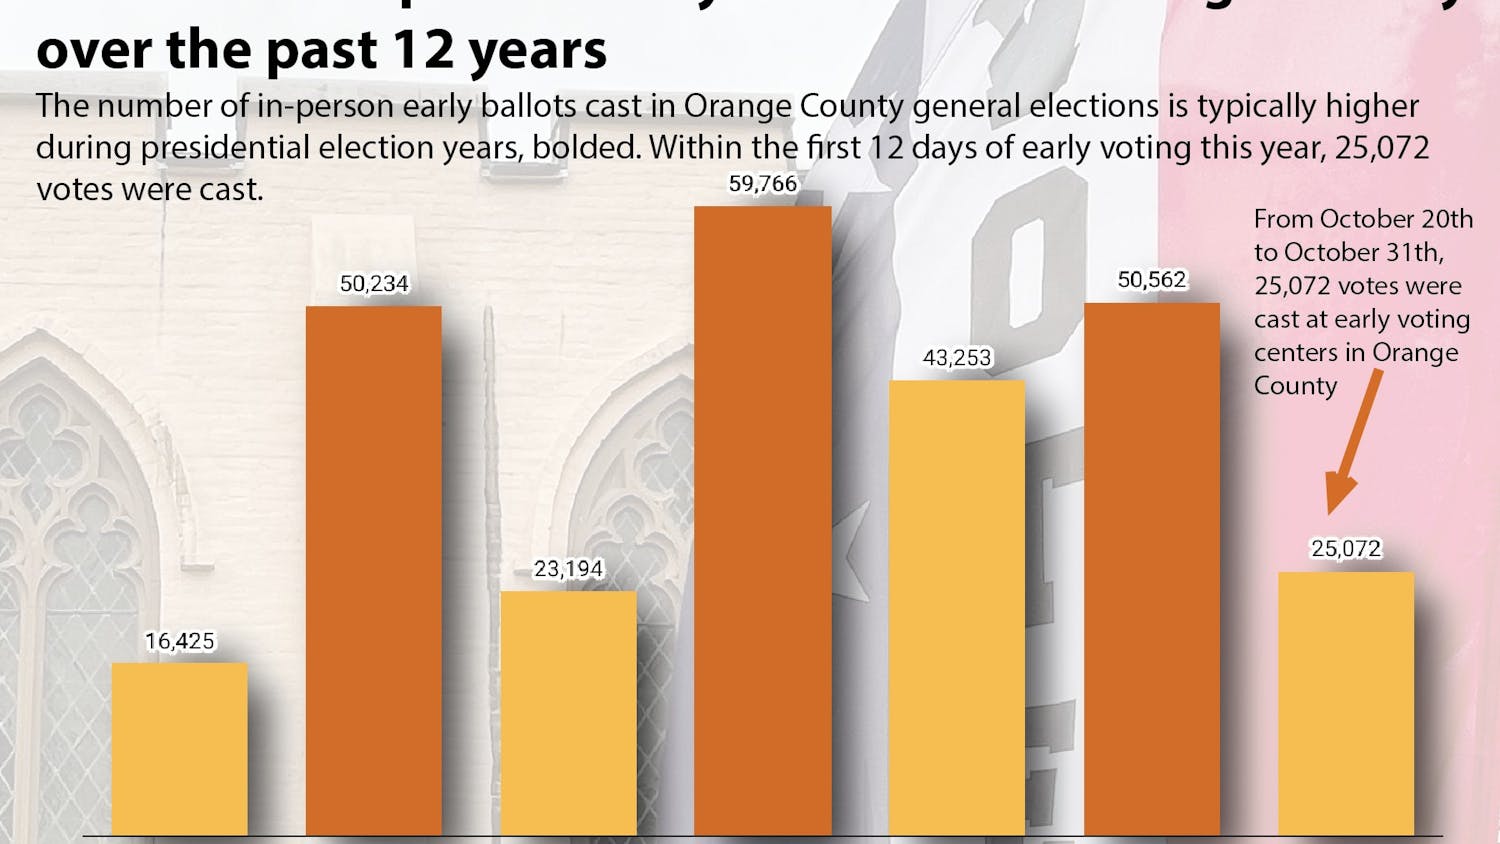 Number of in-person early votes cast in Orange County over the past 12 years